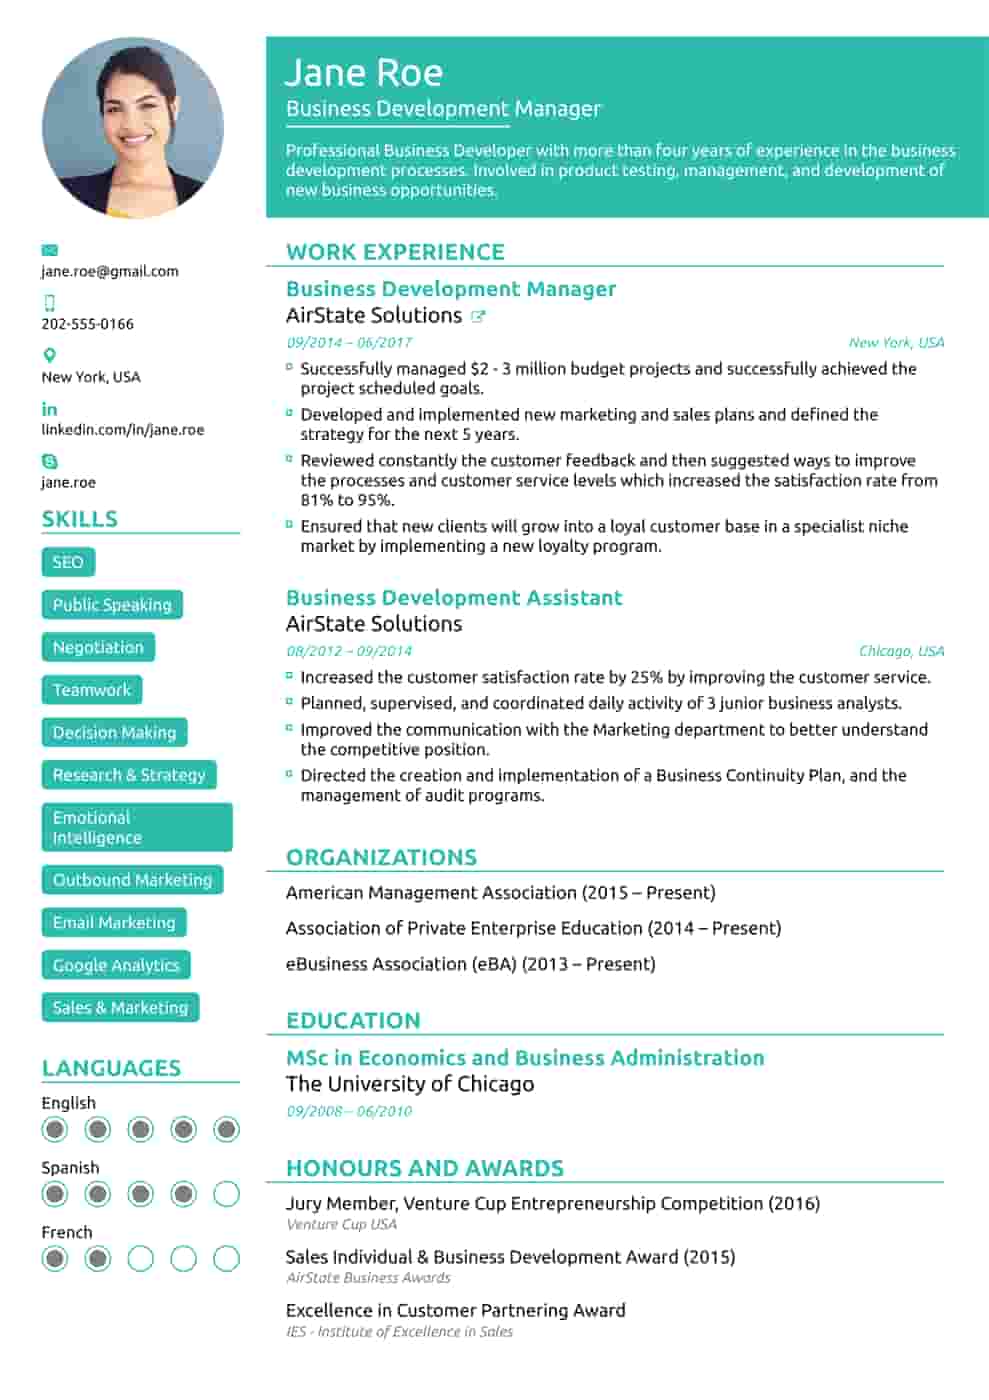 29 Free Resume Templates for Microsoft Word (& How to Make Your Own)